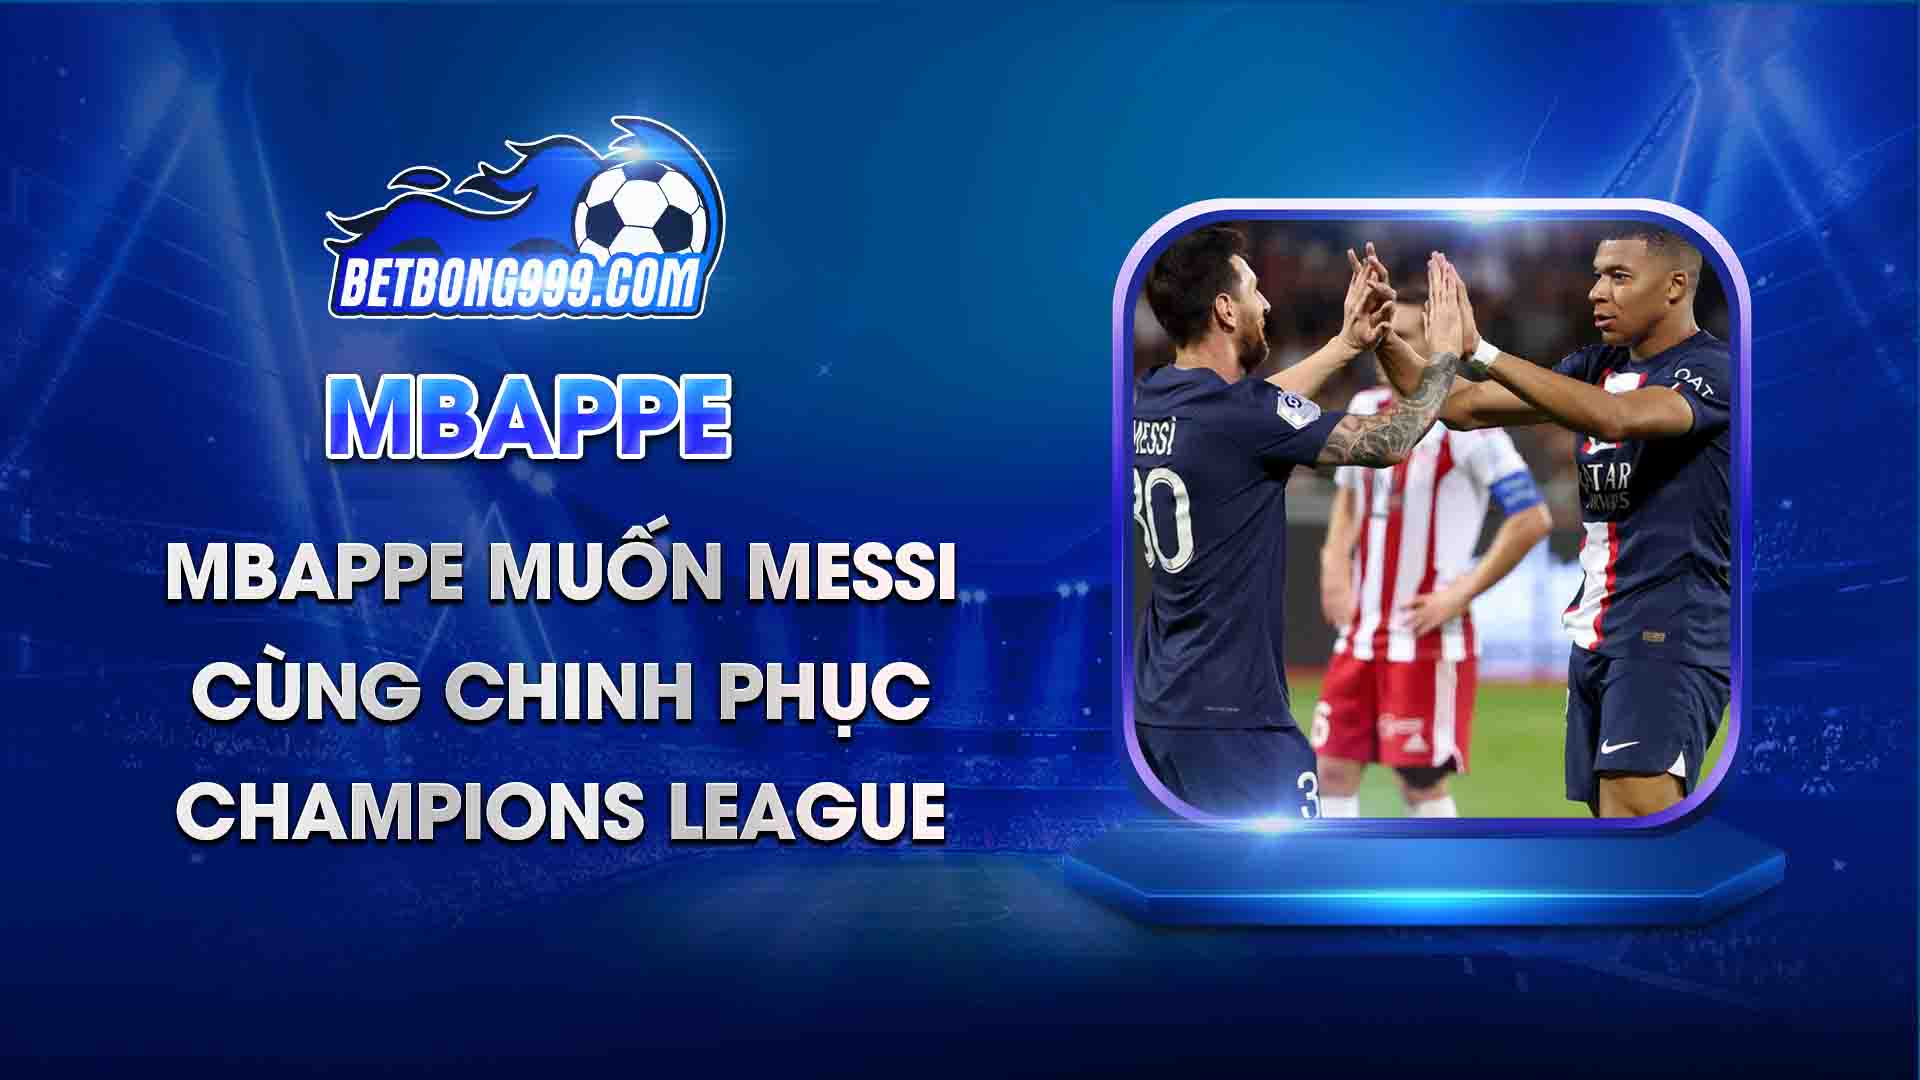 Mbappe muốn Messi cùng chinh phục Champions League